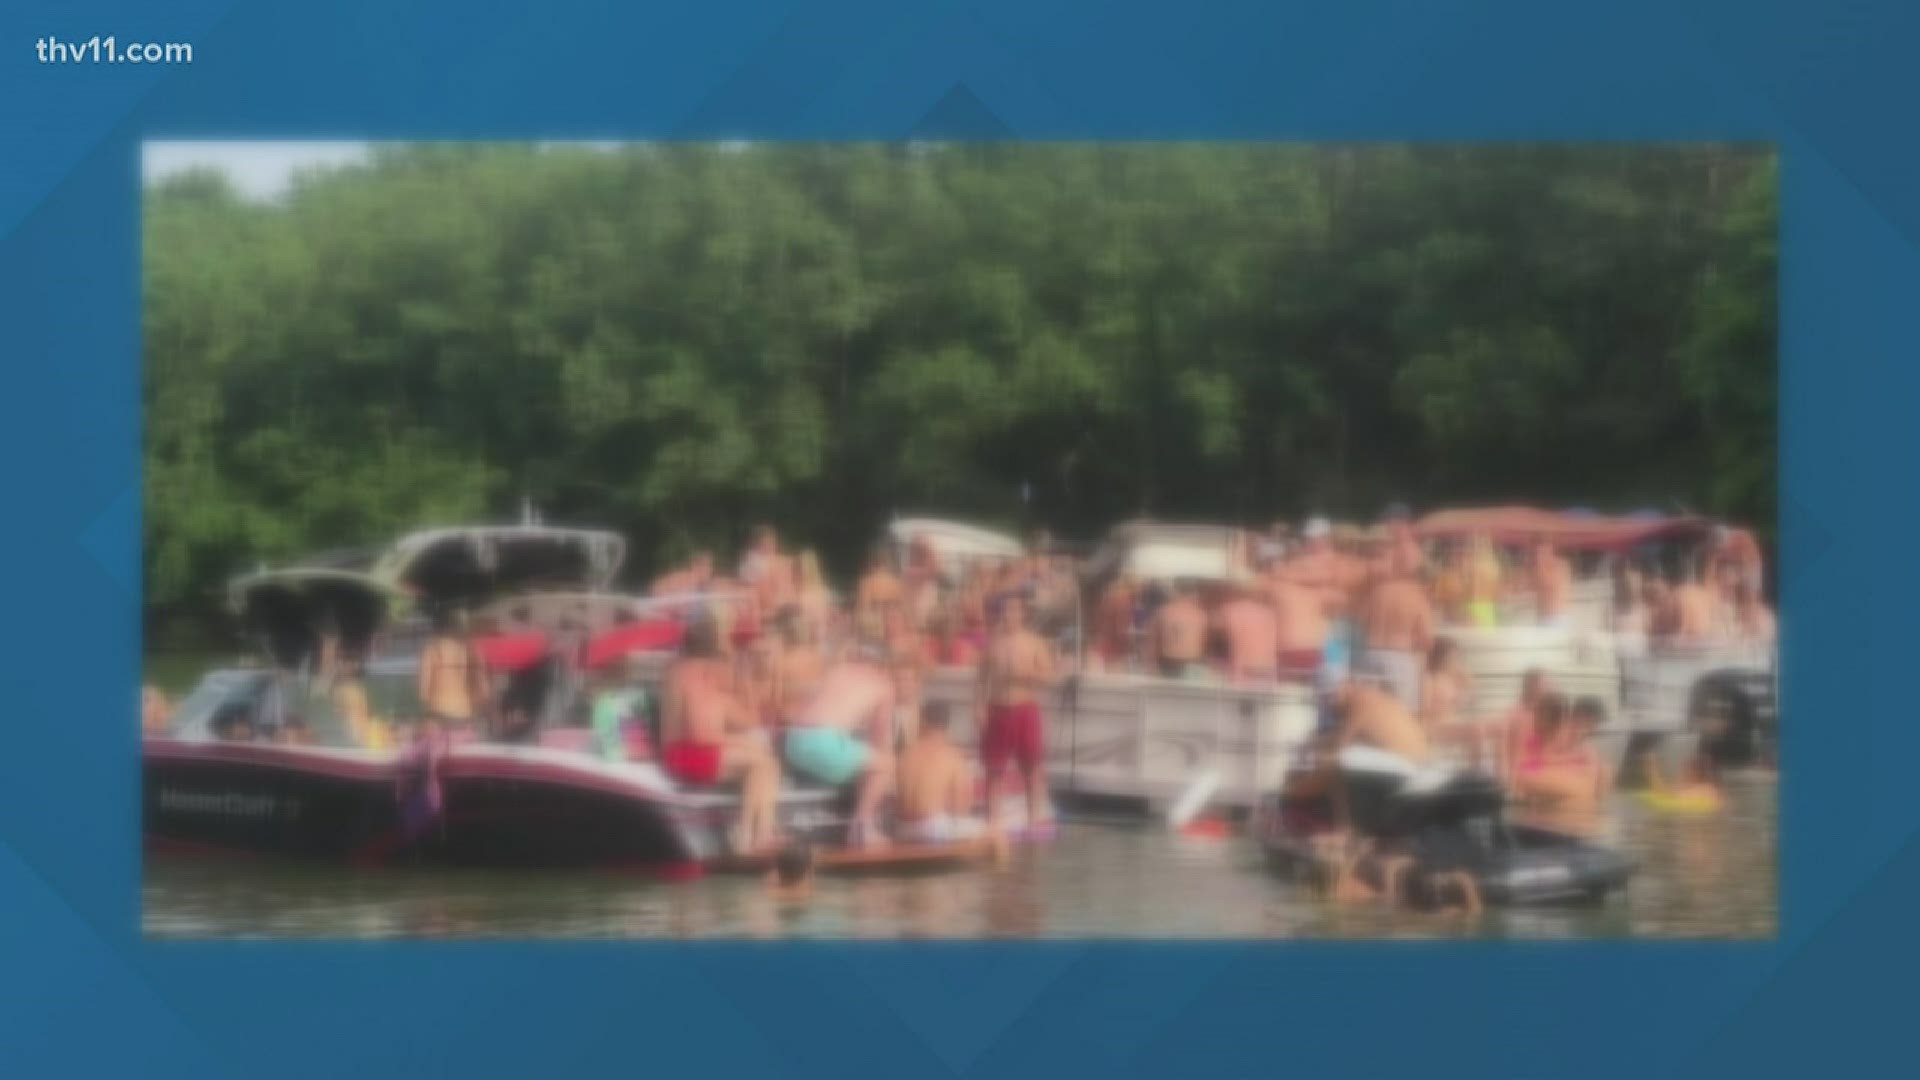 The lake is always busy on Memorial Day weekend, but this year, not everyone is happy about the large crowds gathering on Lake Hamilton in Garland County.